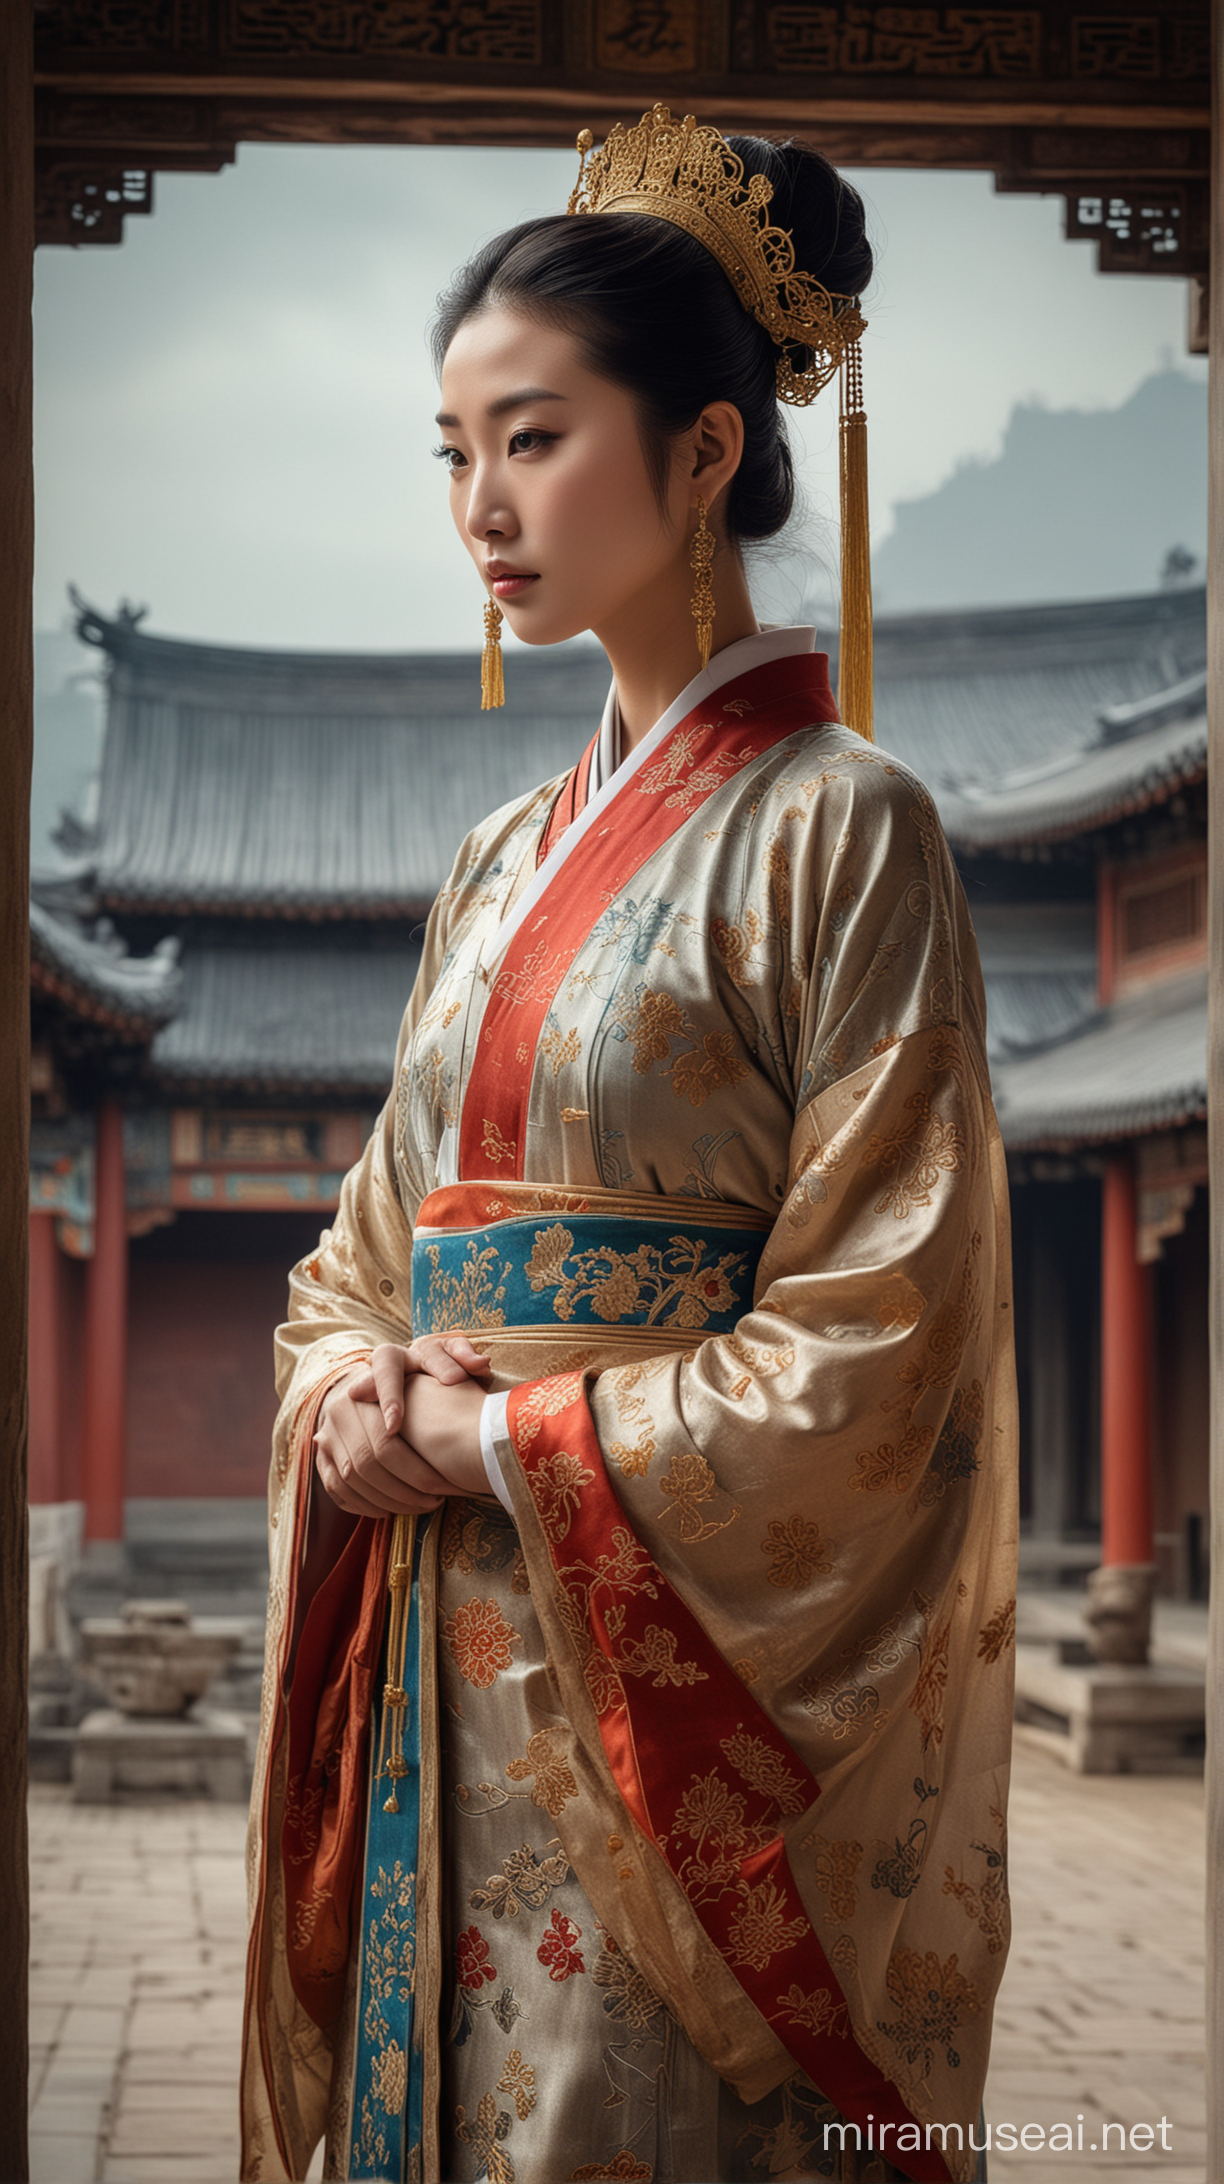 Elegant Sung Dynasty Woman in Traditional Attire Amidst Ancient Chinese Architecture